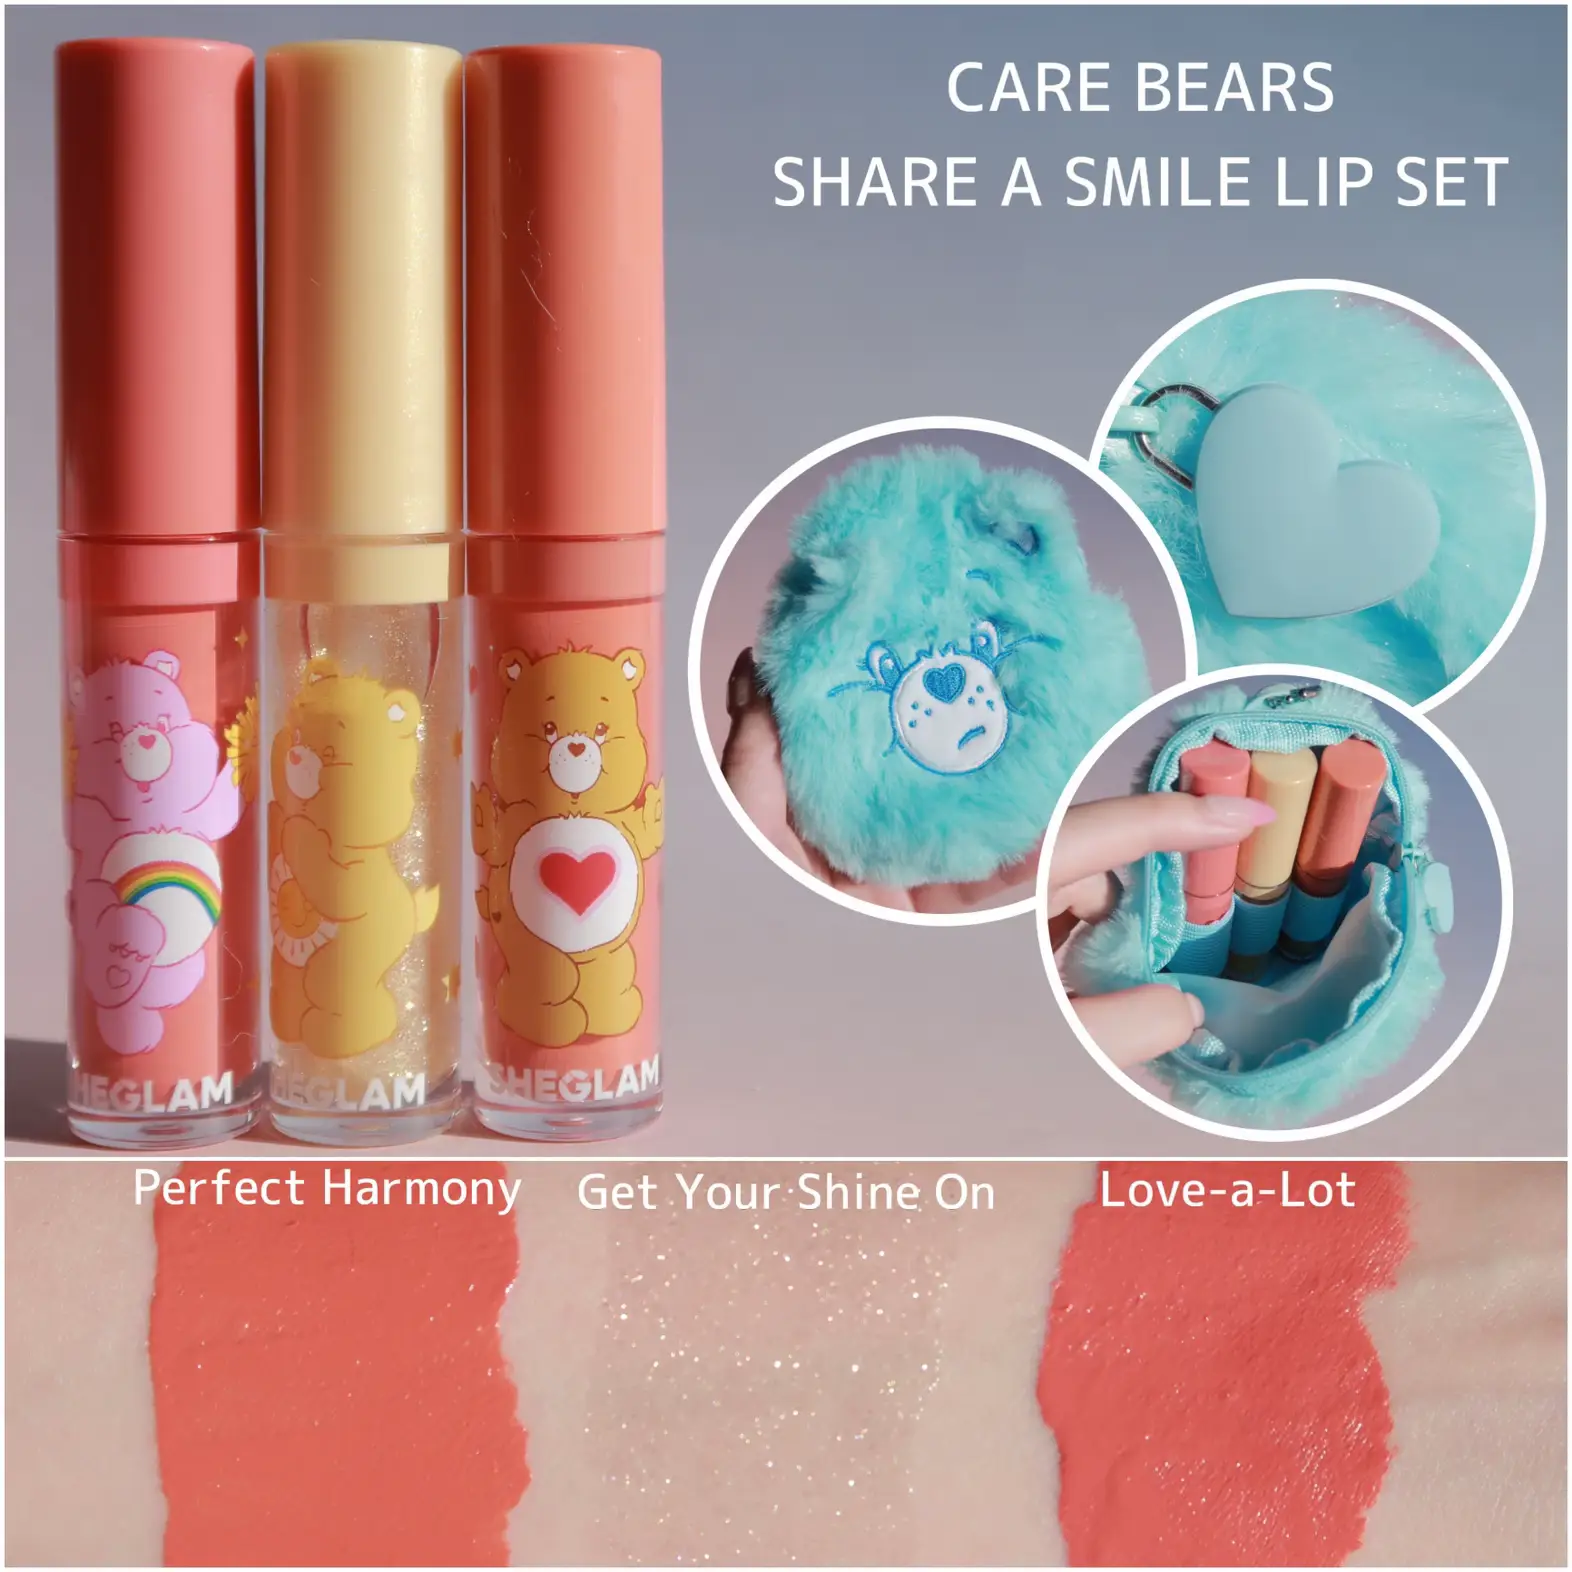 The Care Bears x SHEGLAM Collab Will Leave You Feeling Like Cheer